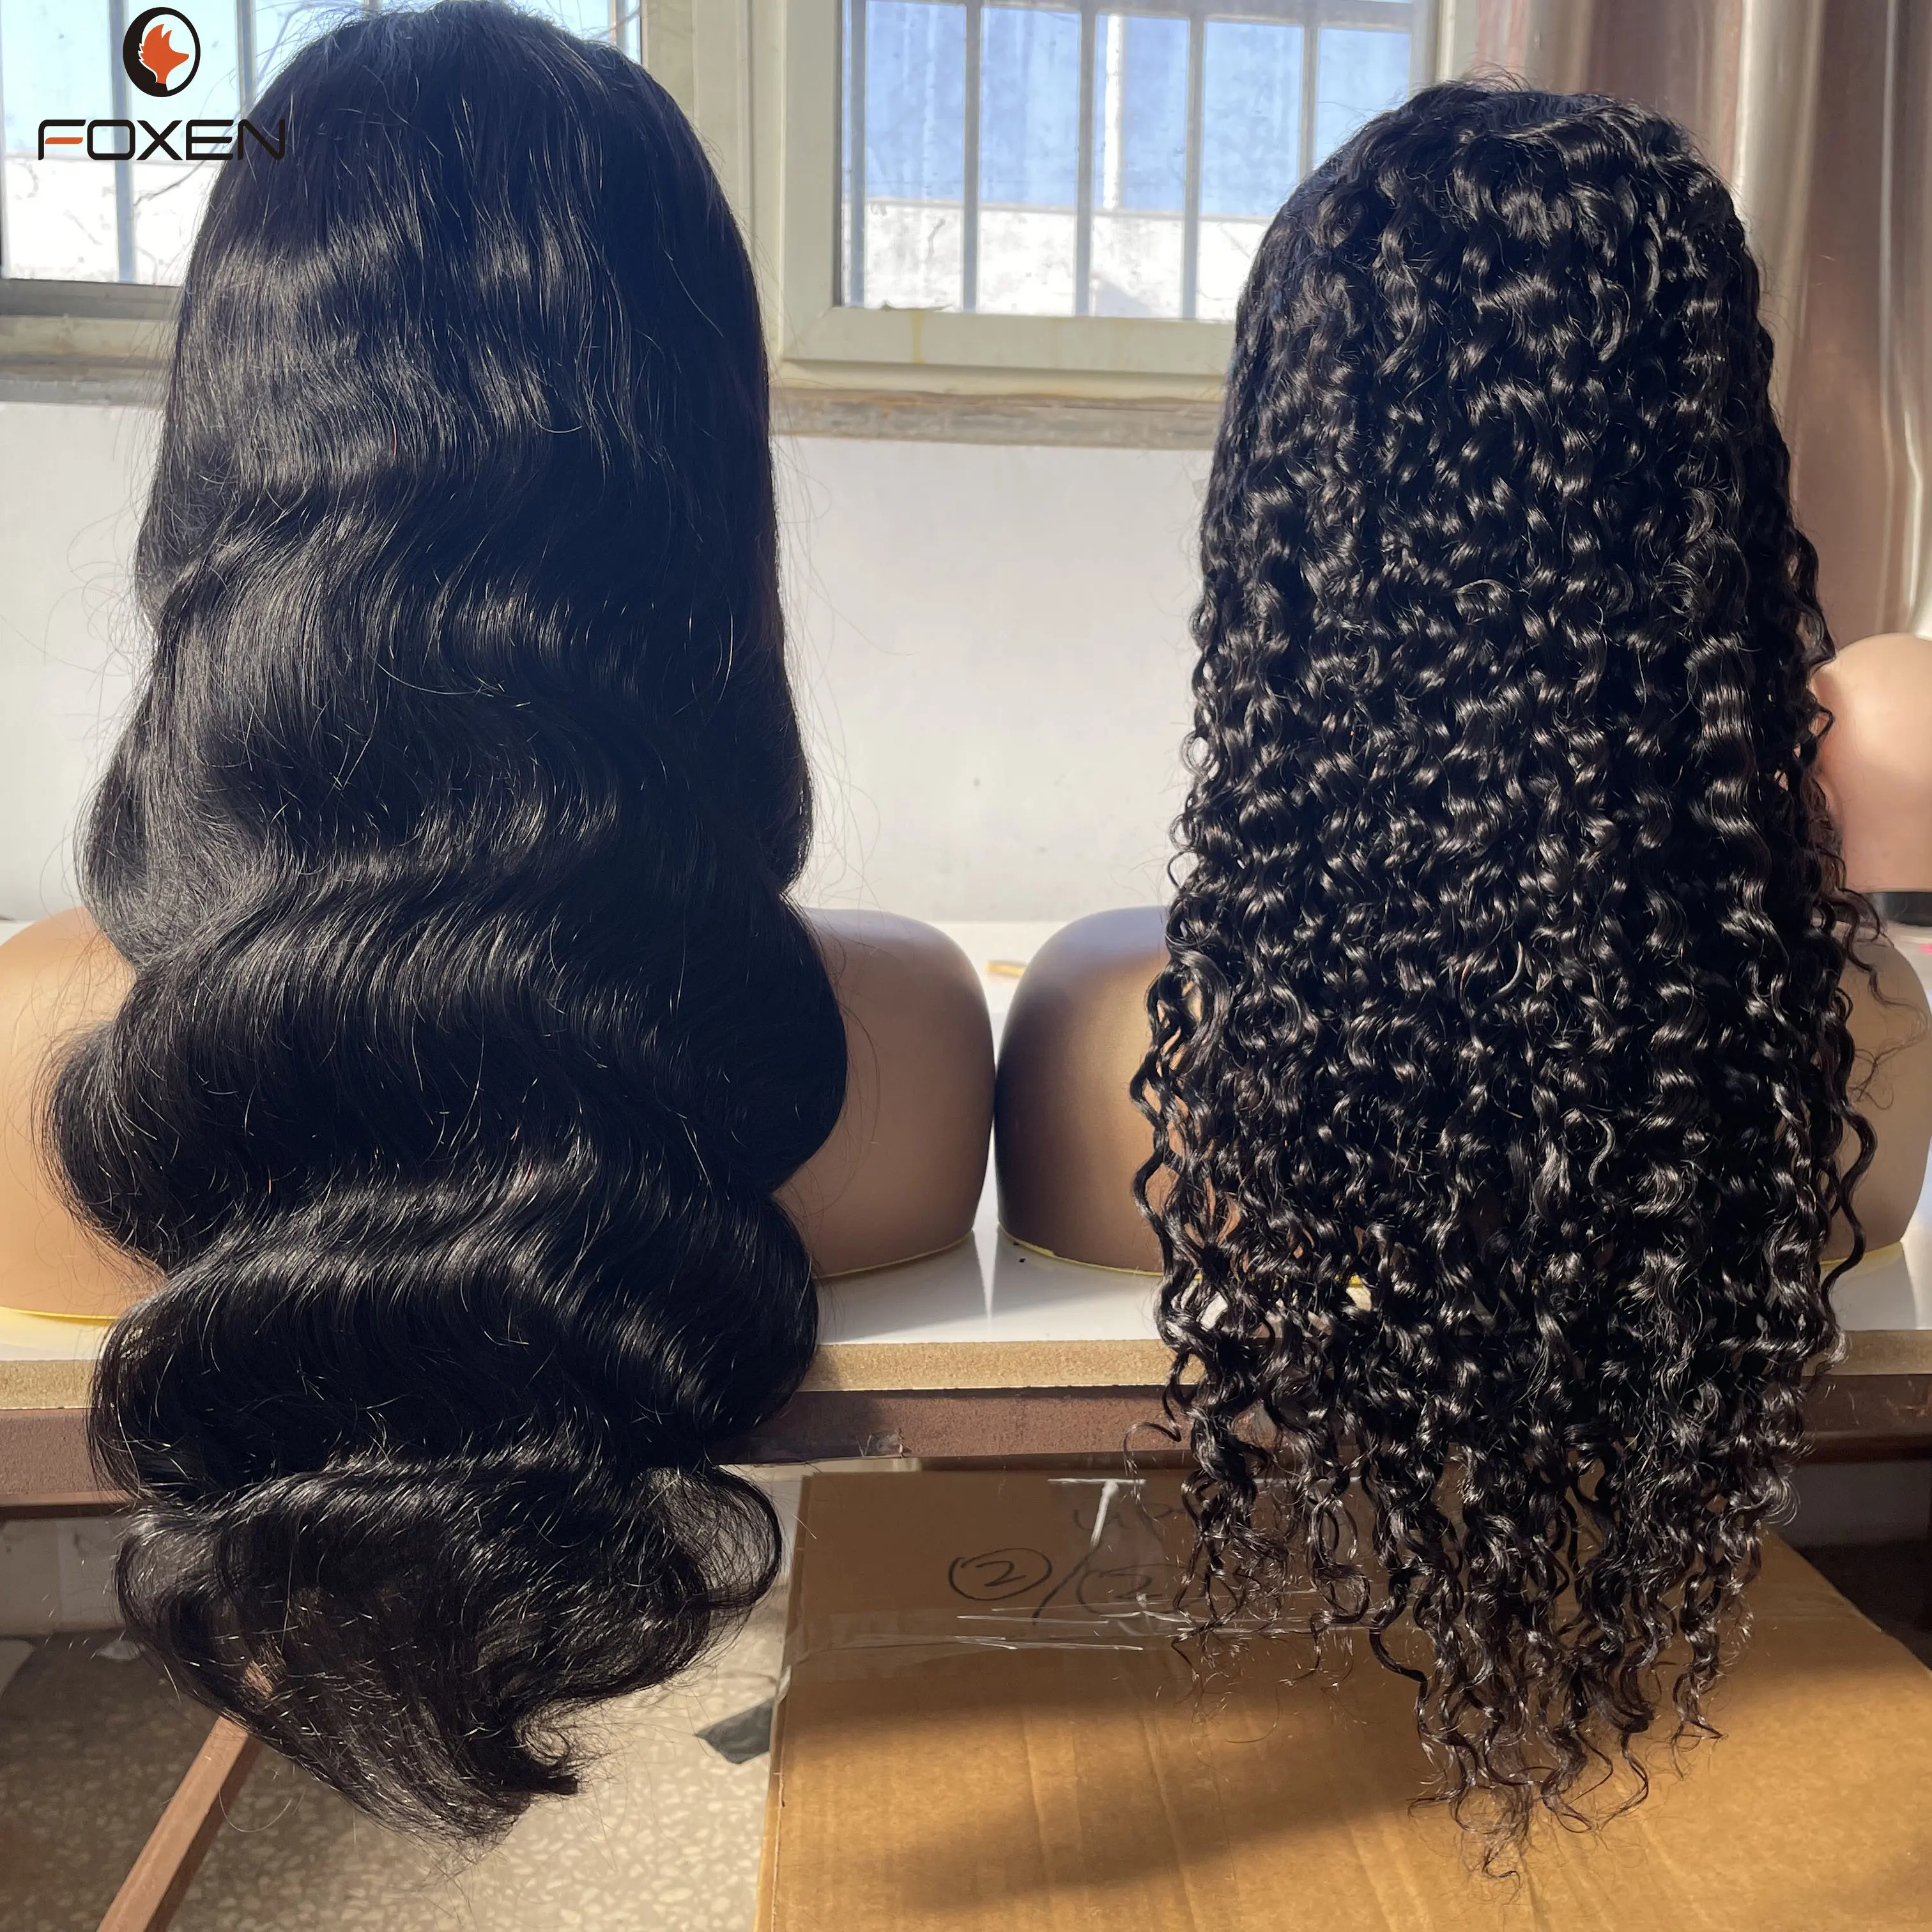 Raw Indian Virgin Hair 40 Inch Body Wave Lace Frontal Wig Pre Plucked Swiss Lace Closure Wig for Black Women Curly Hair Lace Wig